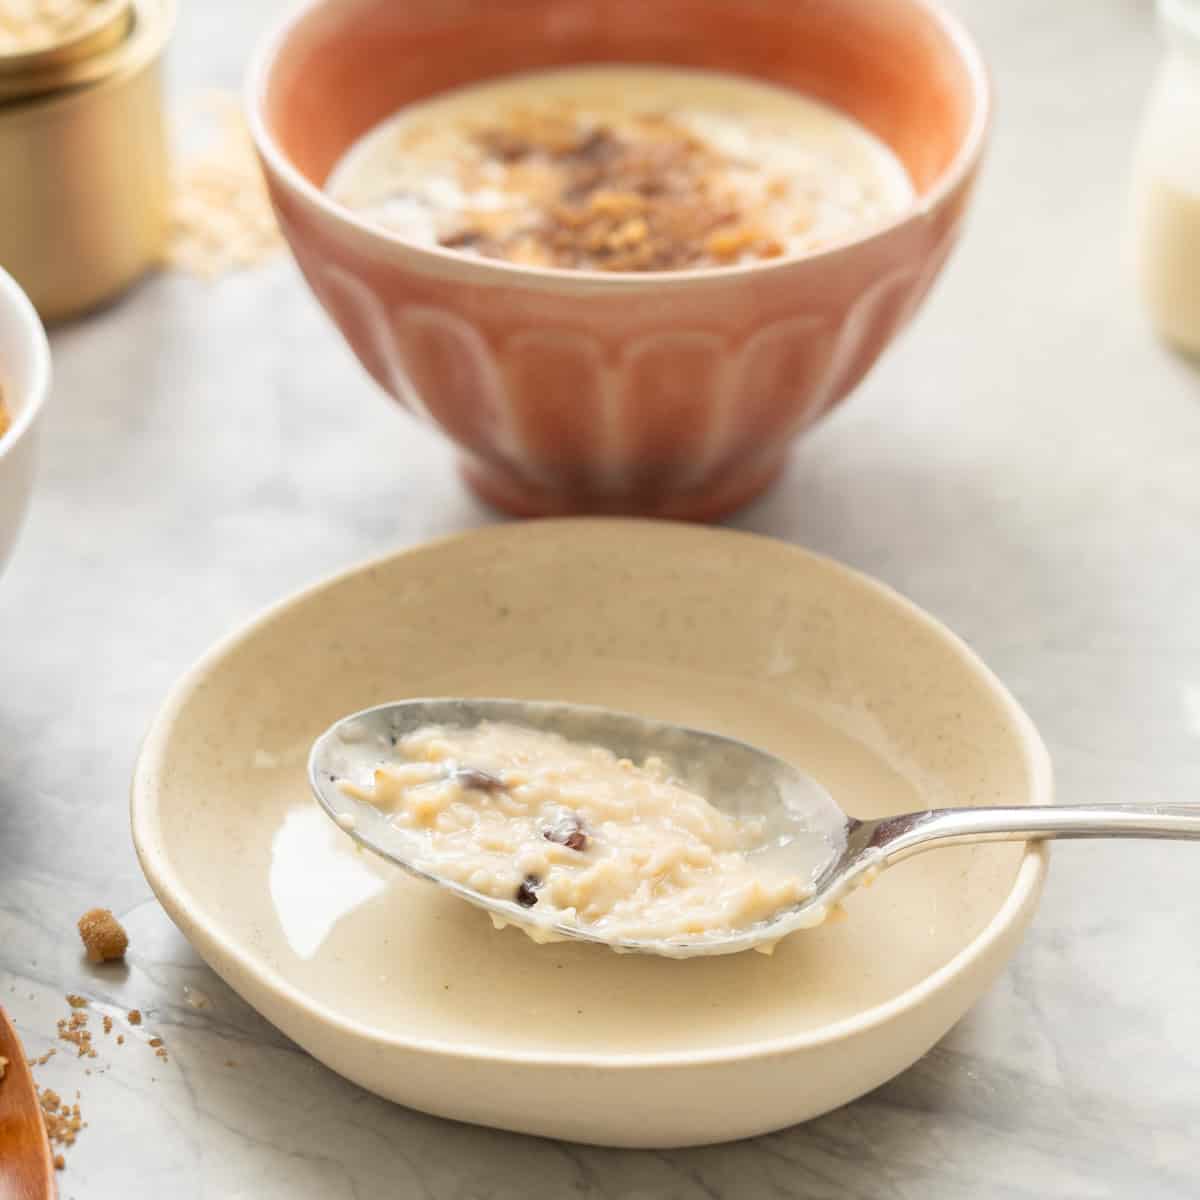 A serving spoon coated in porridge resting on a side plate showing the creamy sauce created when the starches release from oat meal. 